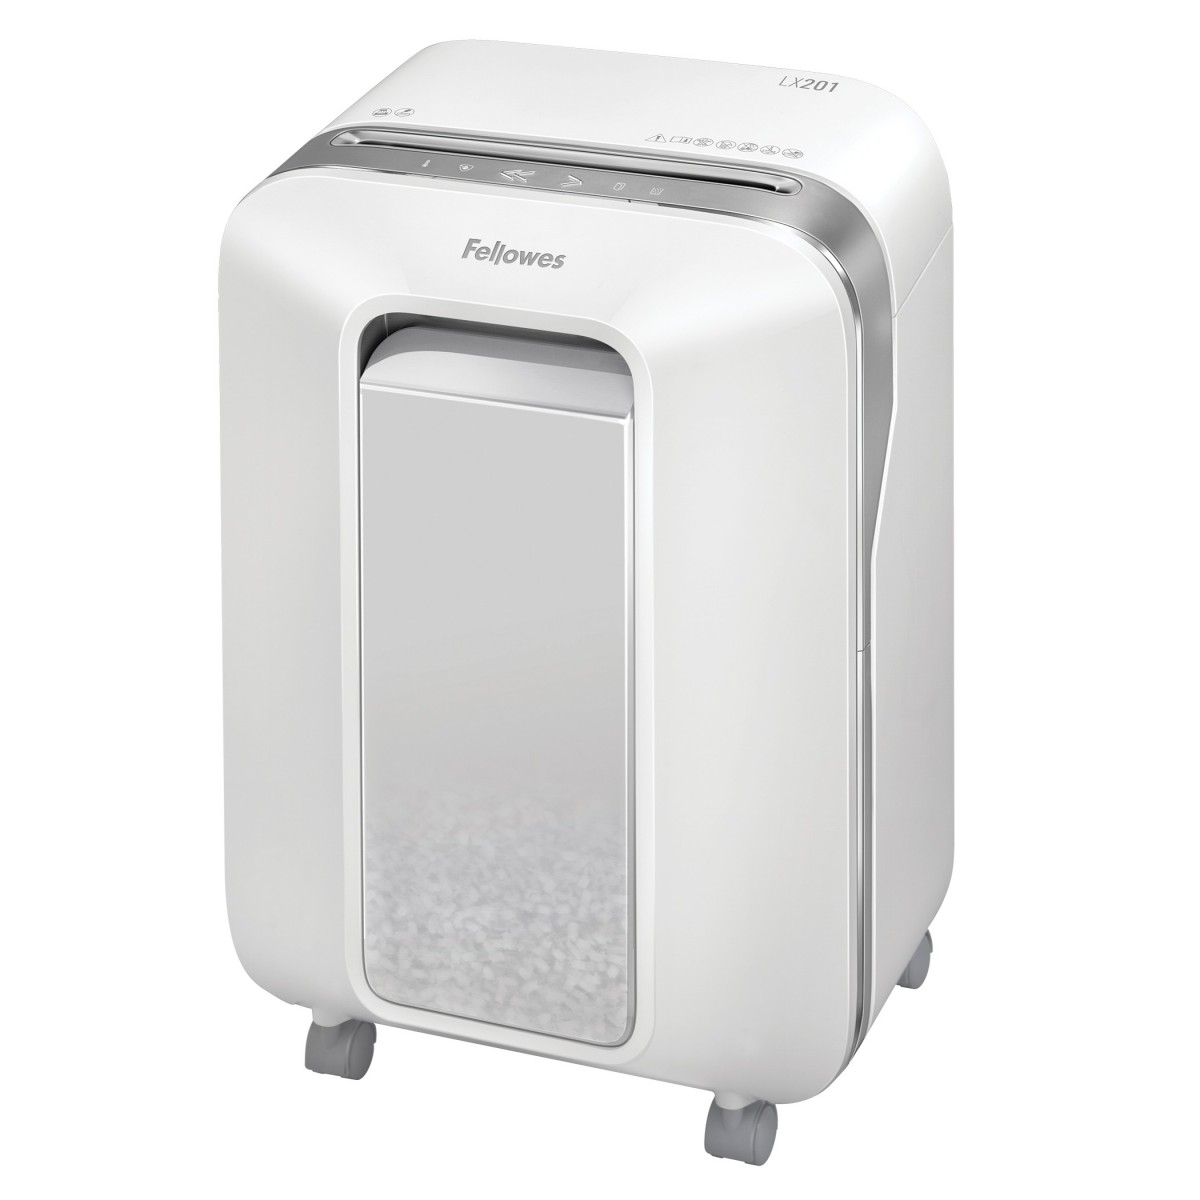 Fellowes BF5050101 - 12 mm - 22 L - Touch - 4 wheel(s) - White - A4